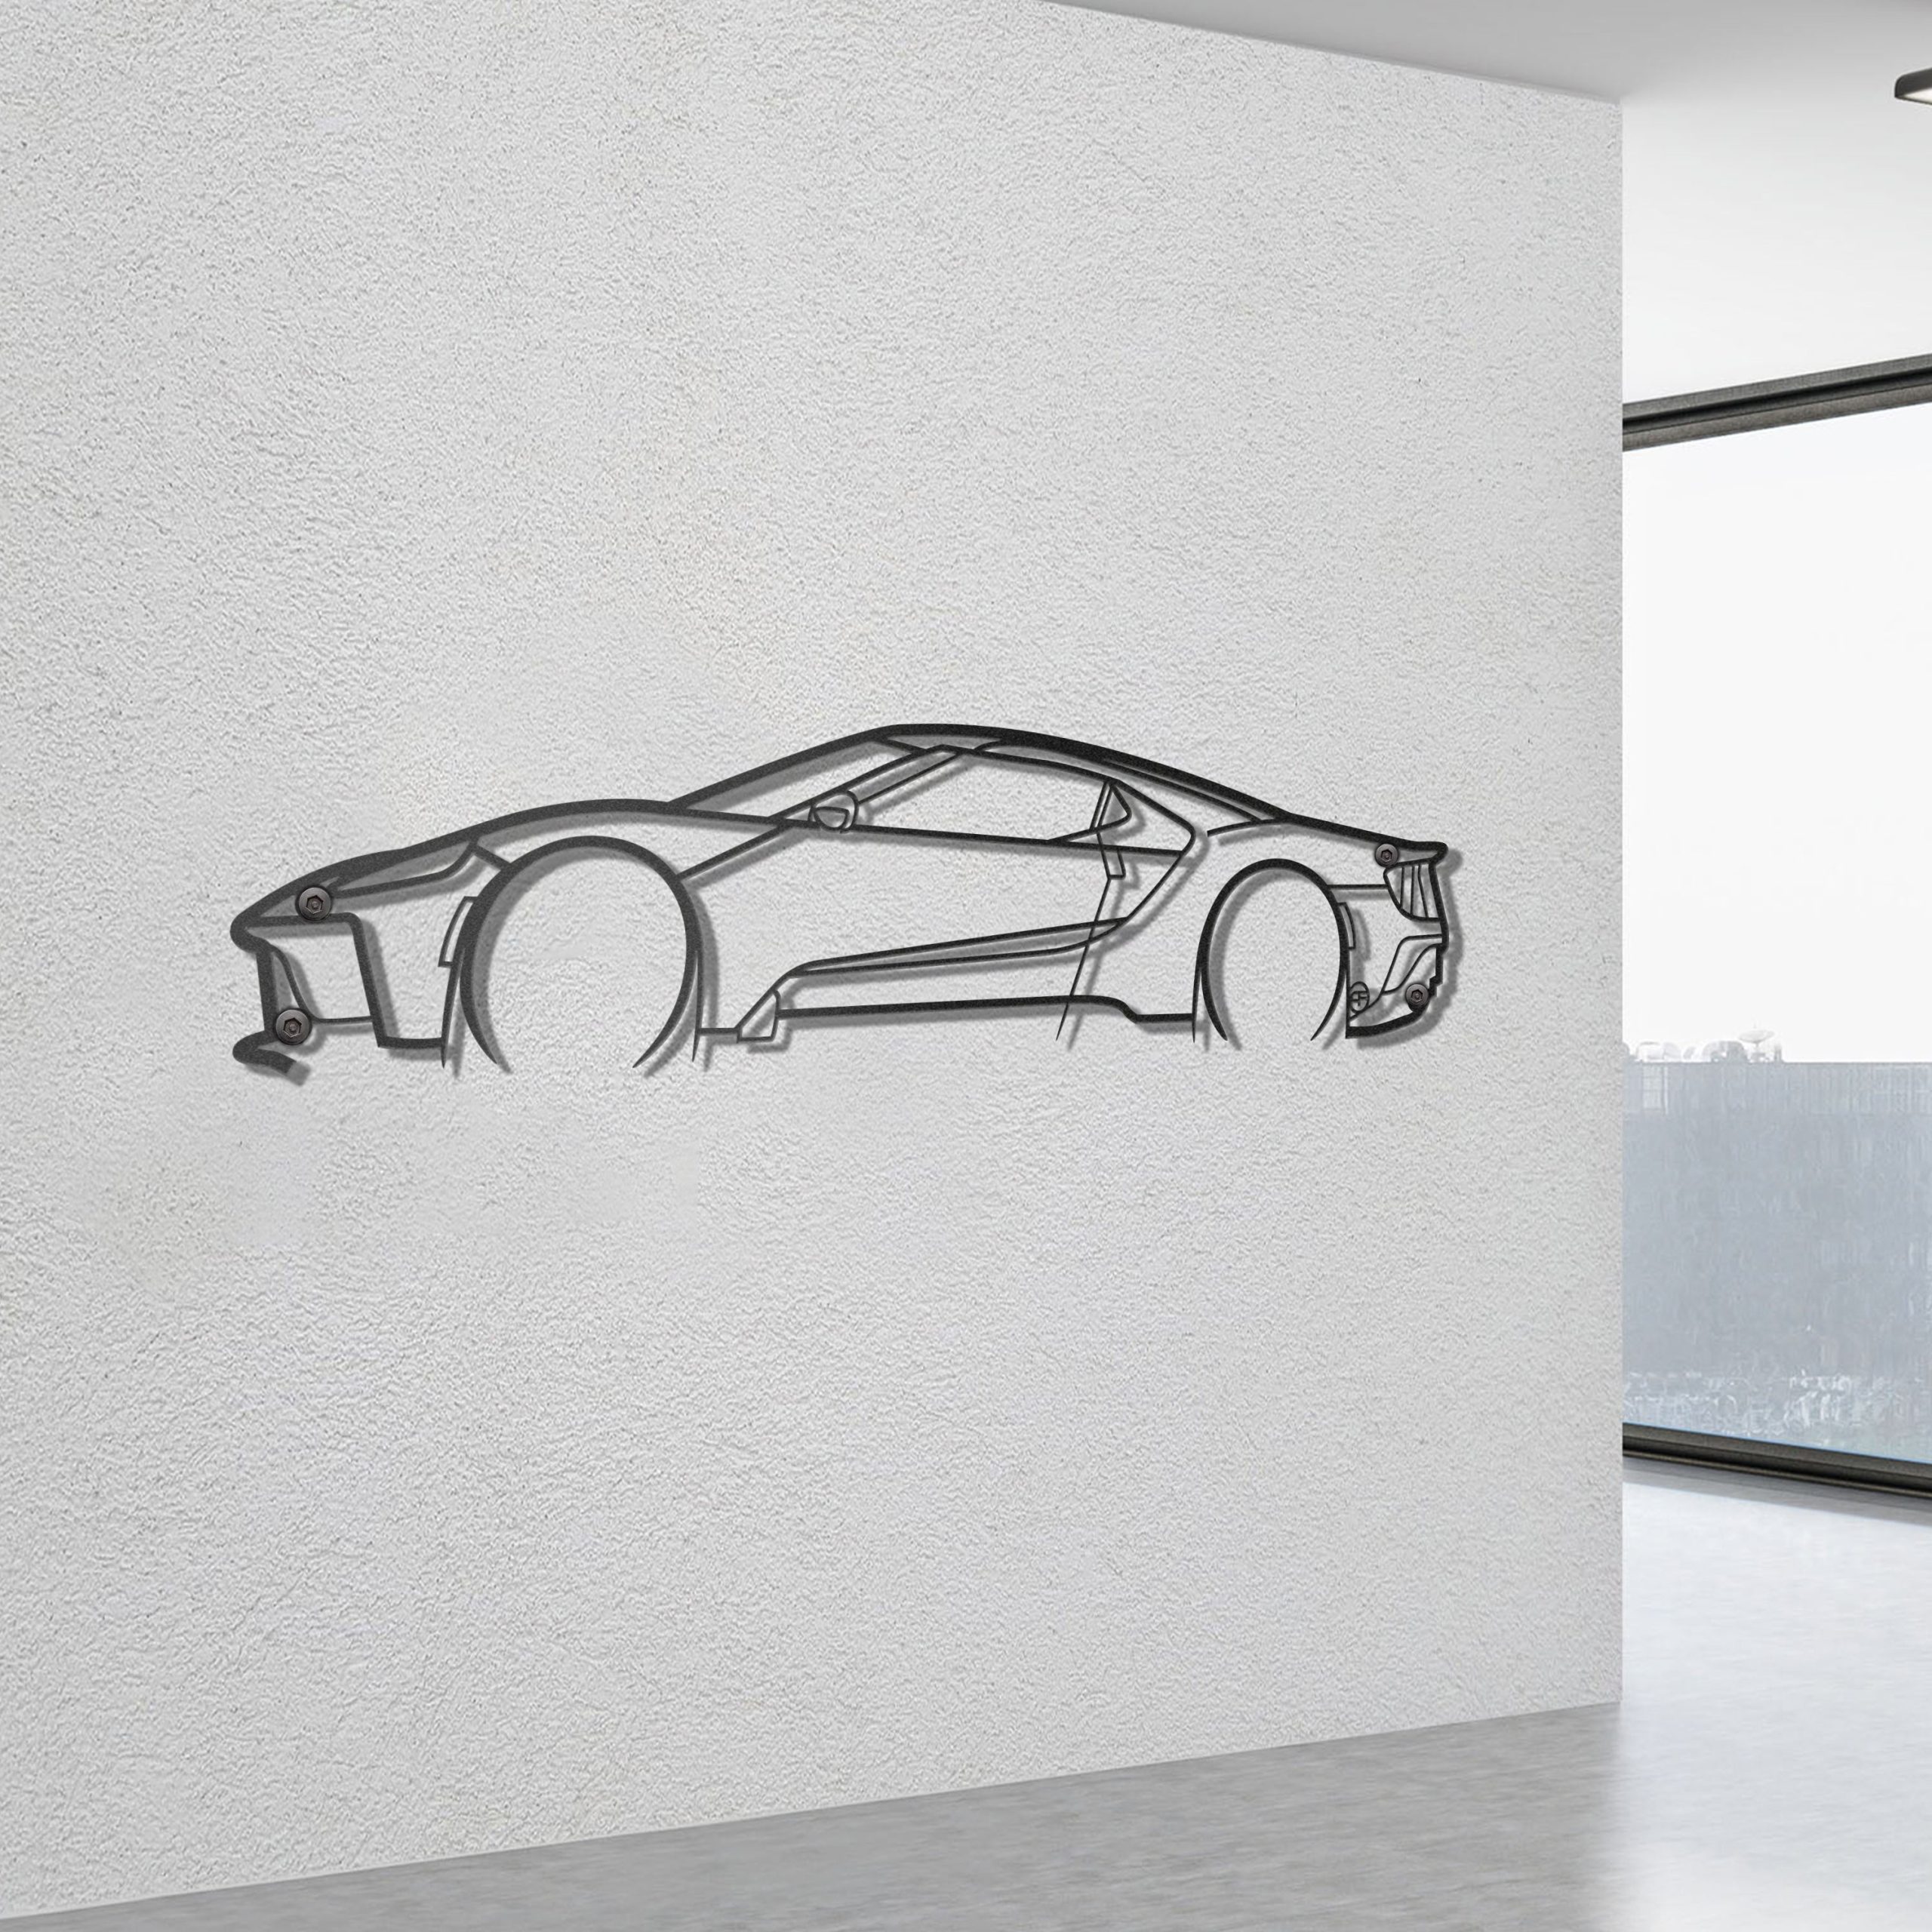 Ford Neon Sign, Neon Ford Sign, Ford Decor, Ford Logo Wall Art